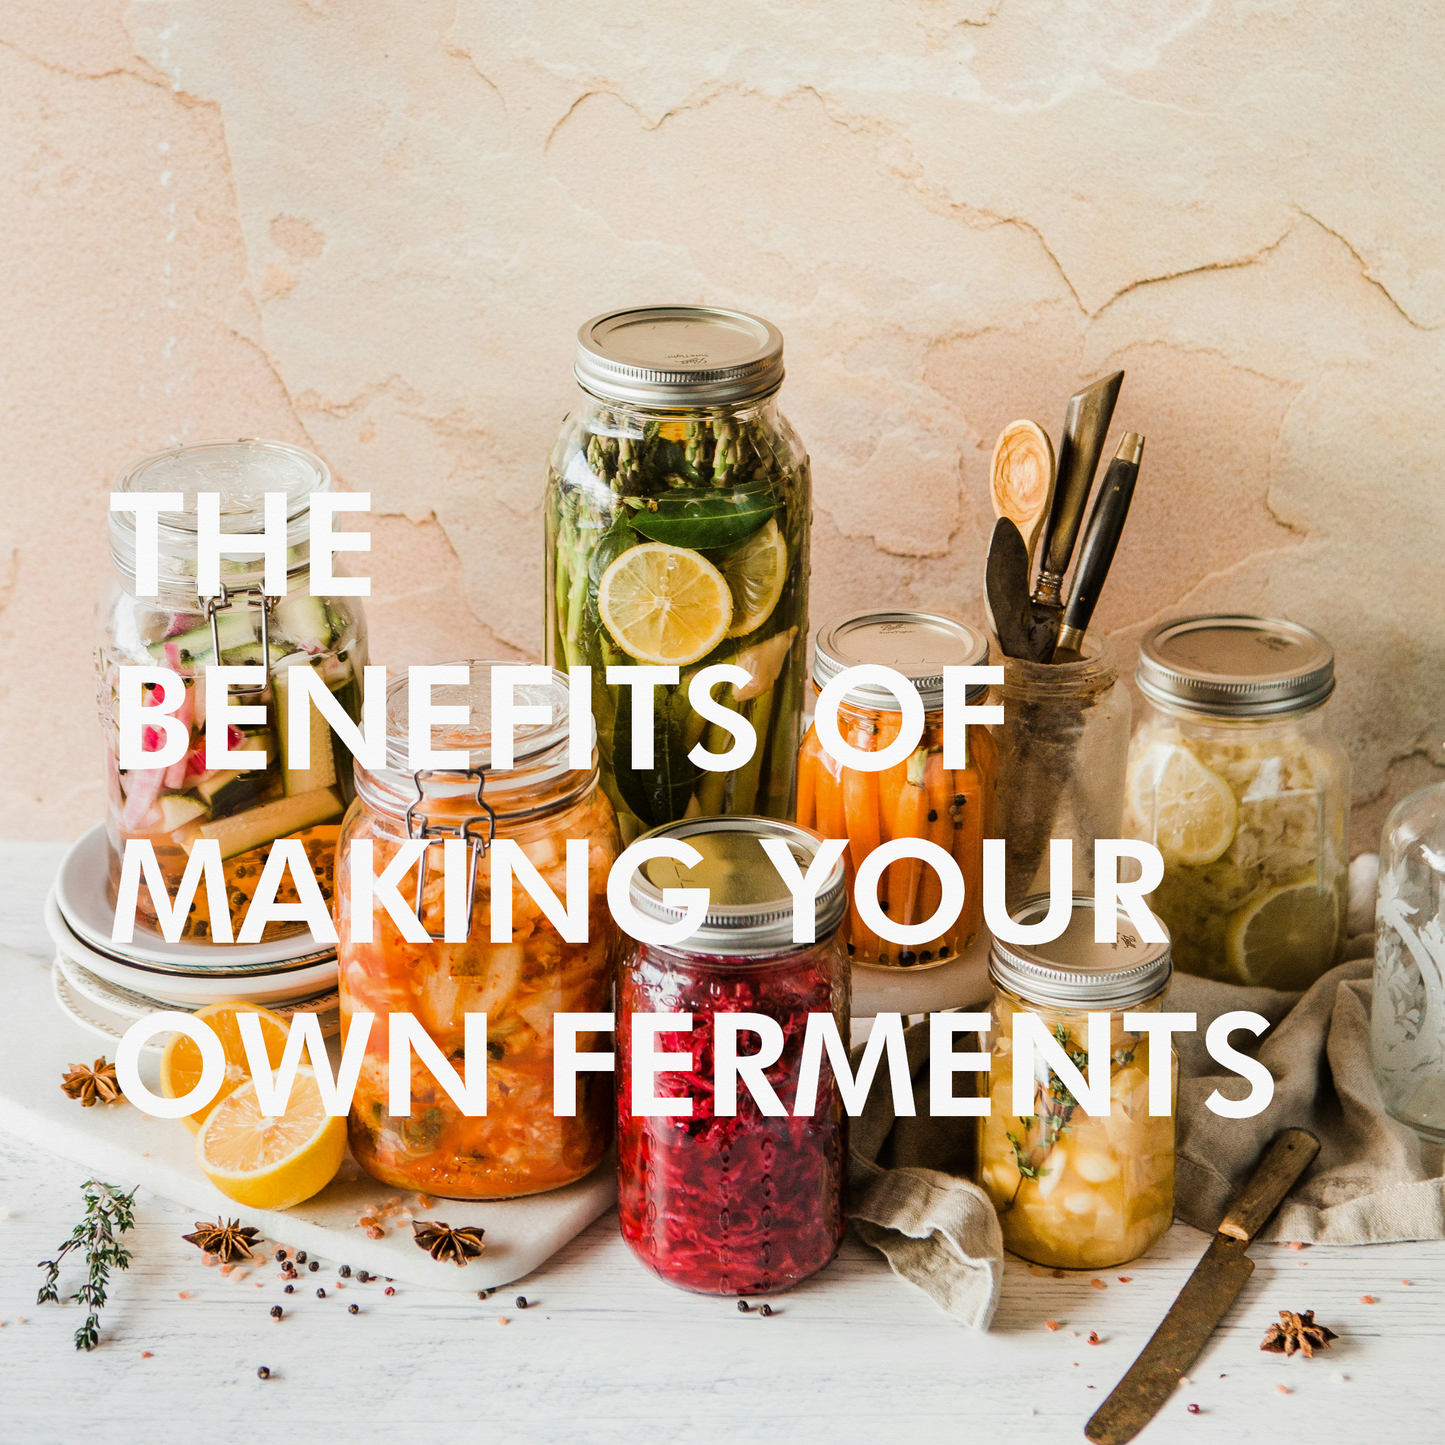 THE BENEFITS OF MAKING YOUR OWN FERMENTS